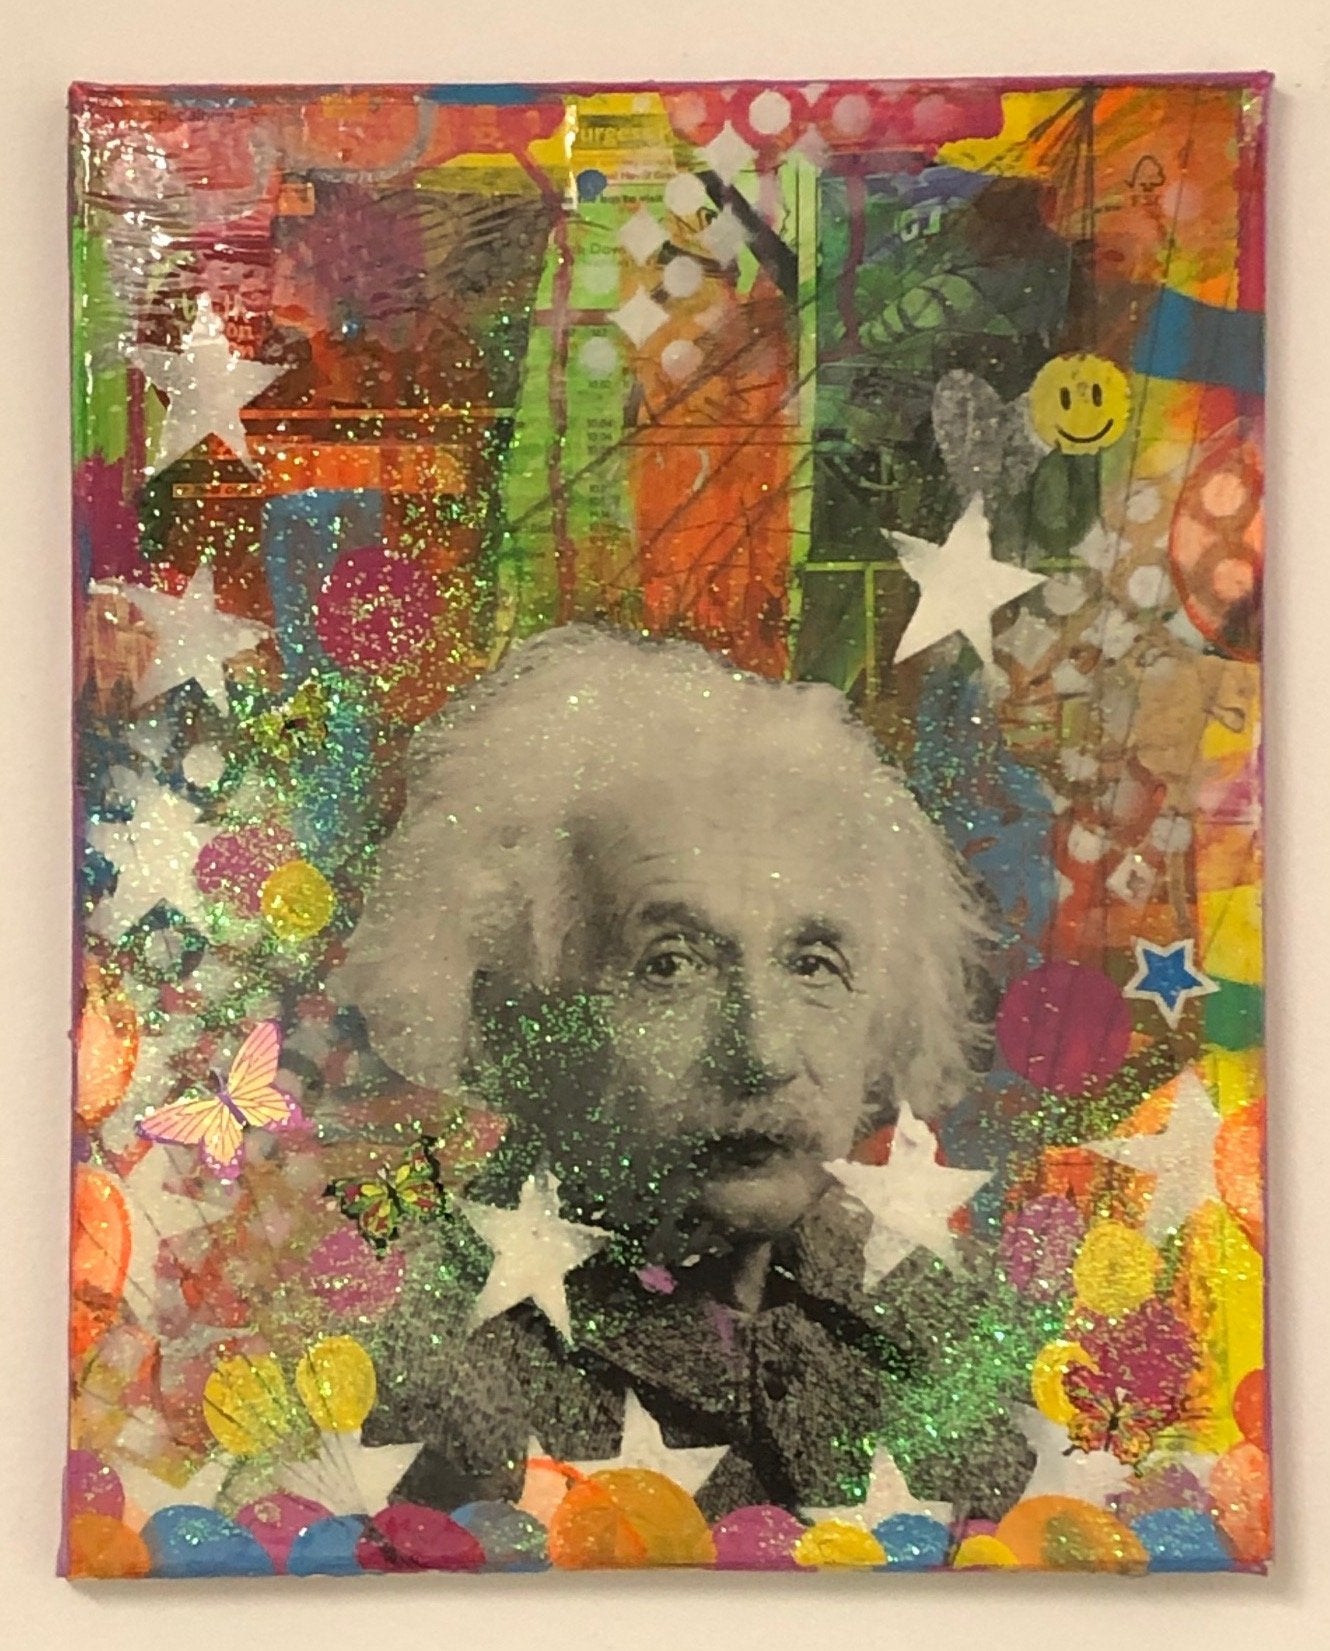 E=mc2 by Barrie J Davies 2019, mixed media on canvas, unframed, 35cm x 28cm. Barrie J Davies is an Artist - Pop Art and Street art inspired Artist based in Brighton England UK - Pop Art Paintings, Street Art Prints & Editions available